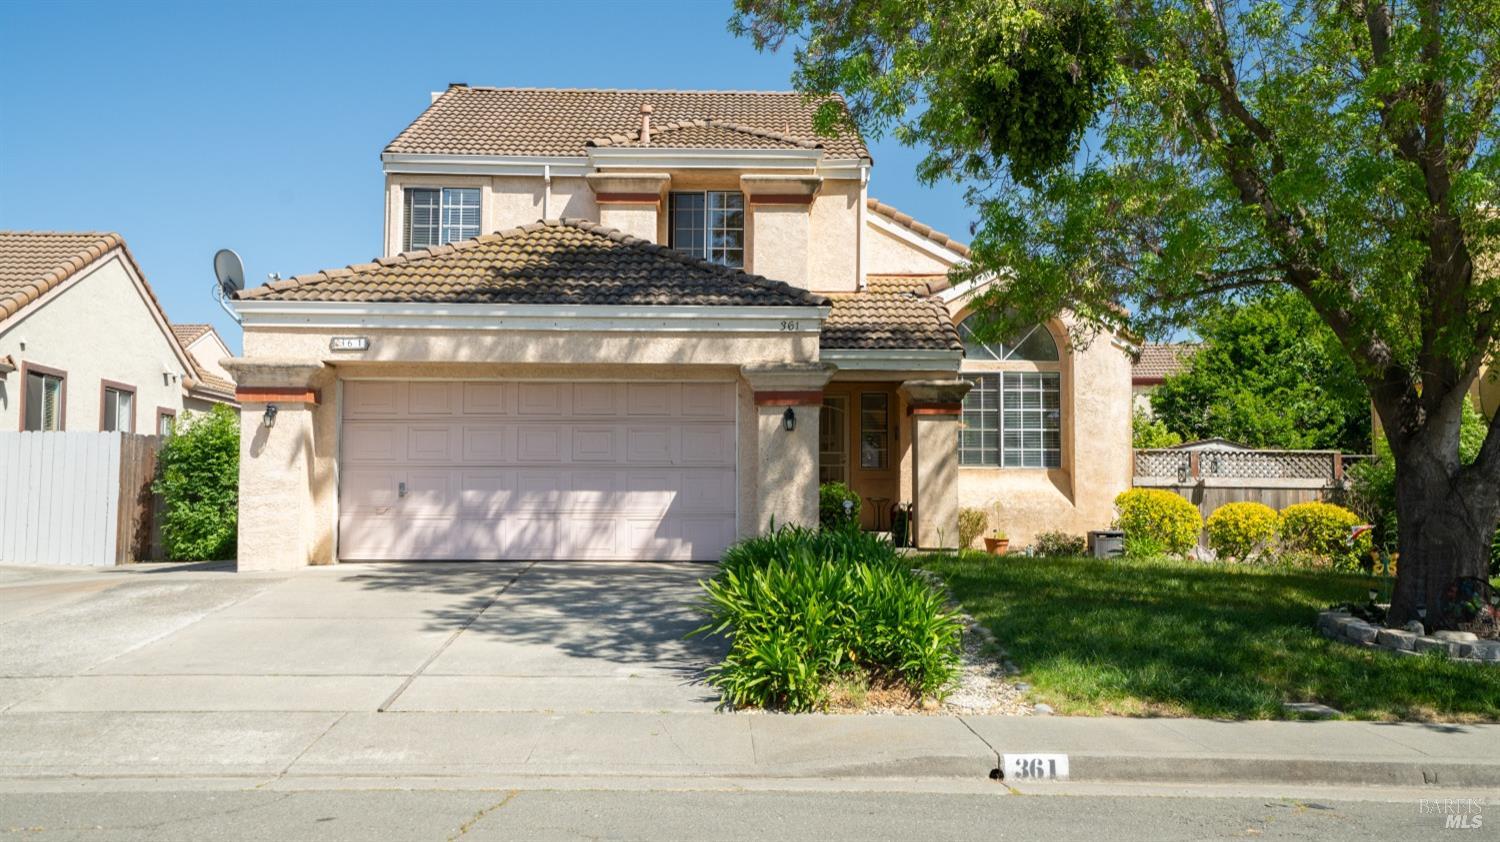 Nestled in the charming Lawler Ranch neighborhood, this immaculate two-story home offers 4 bedrooms 